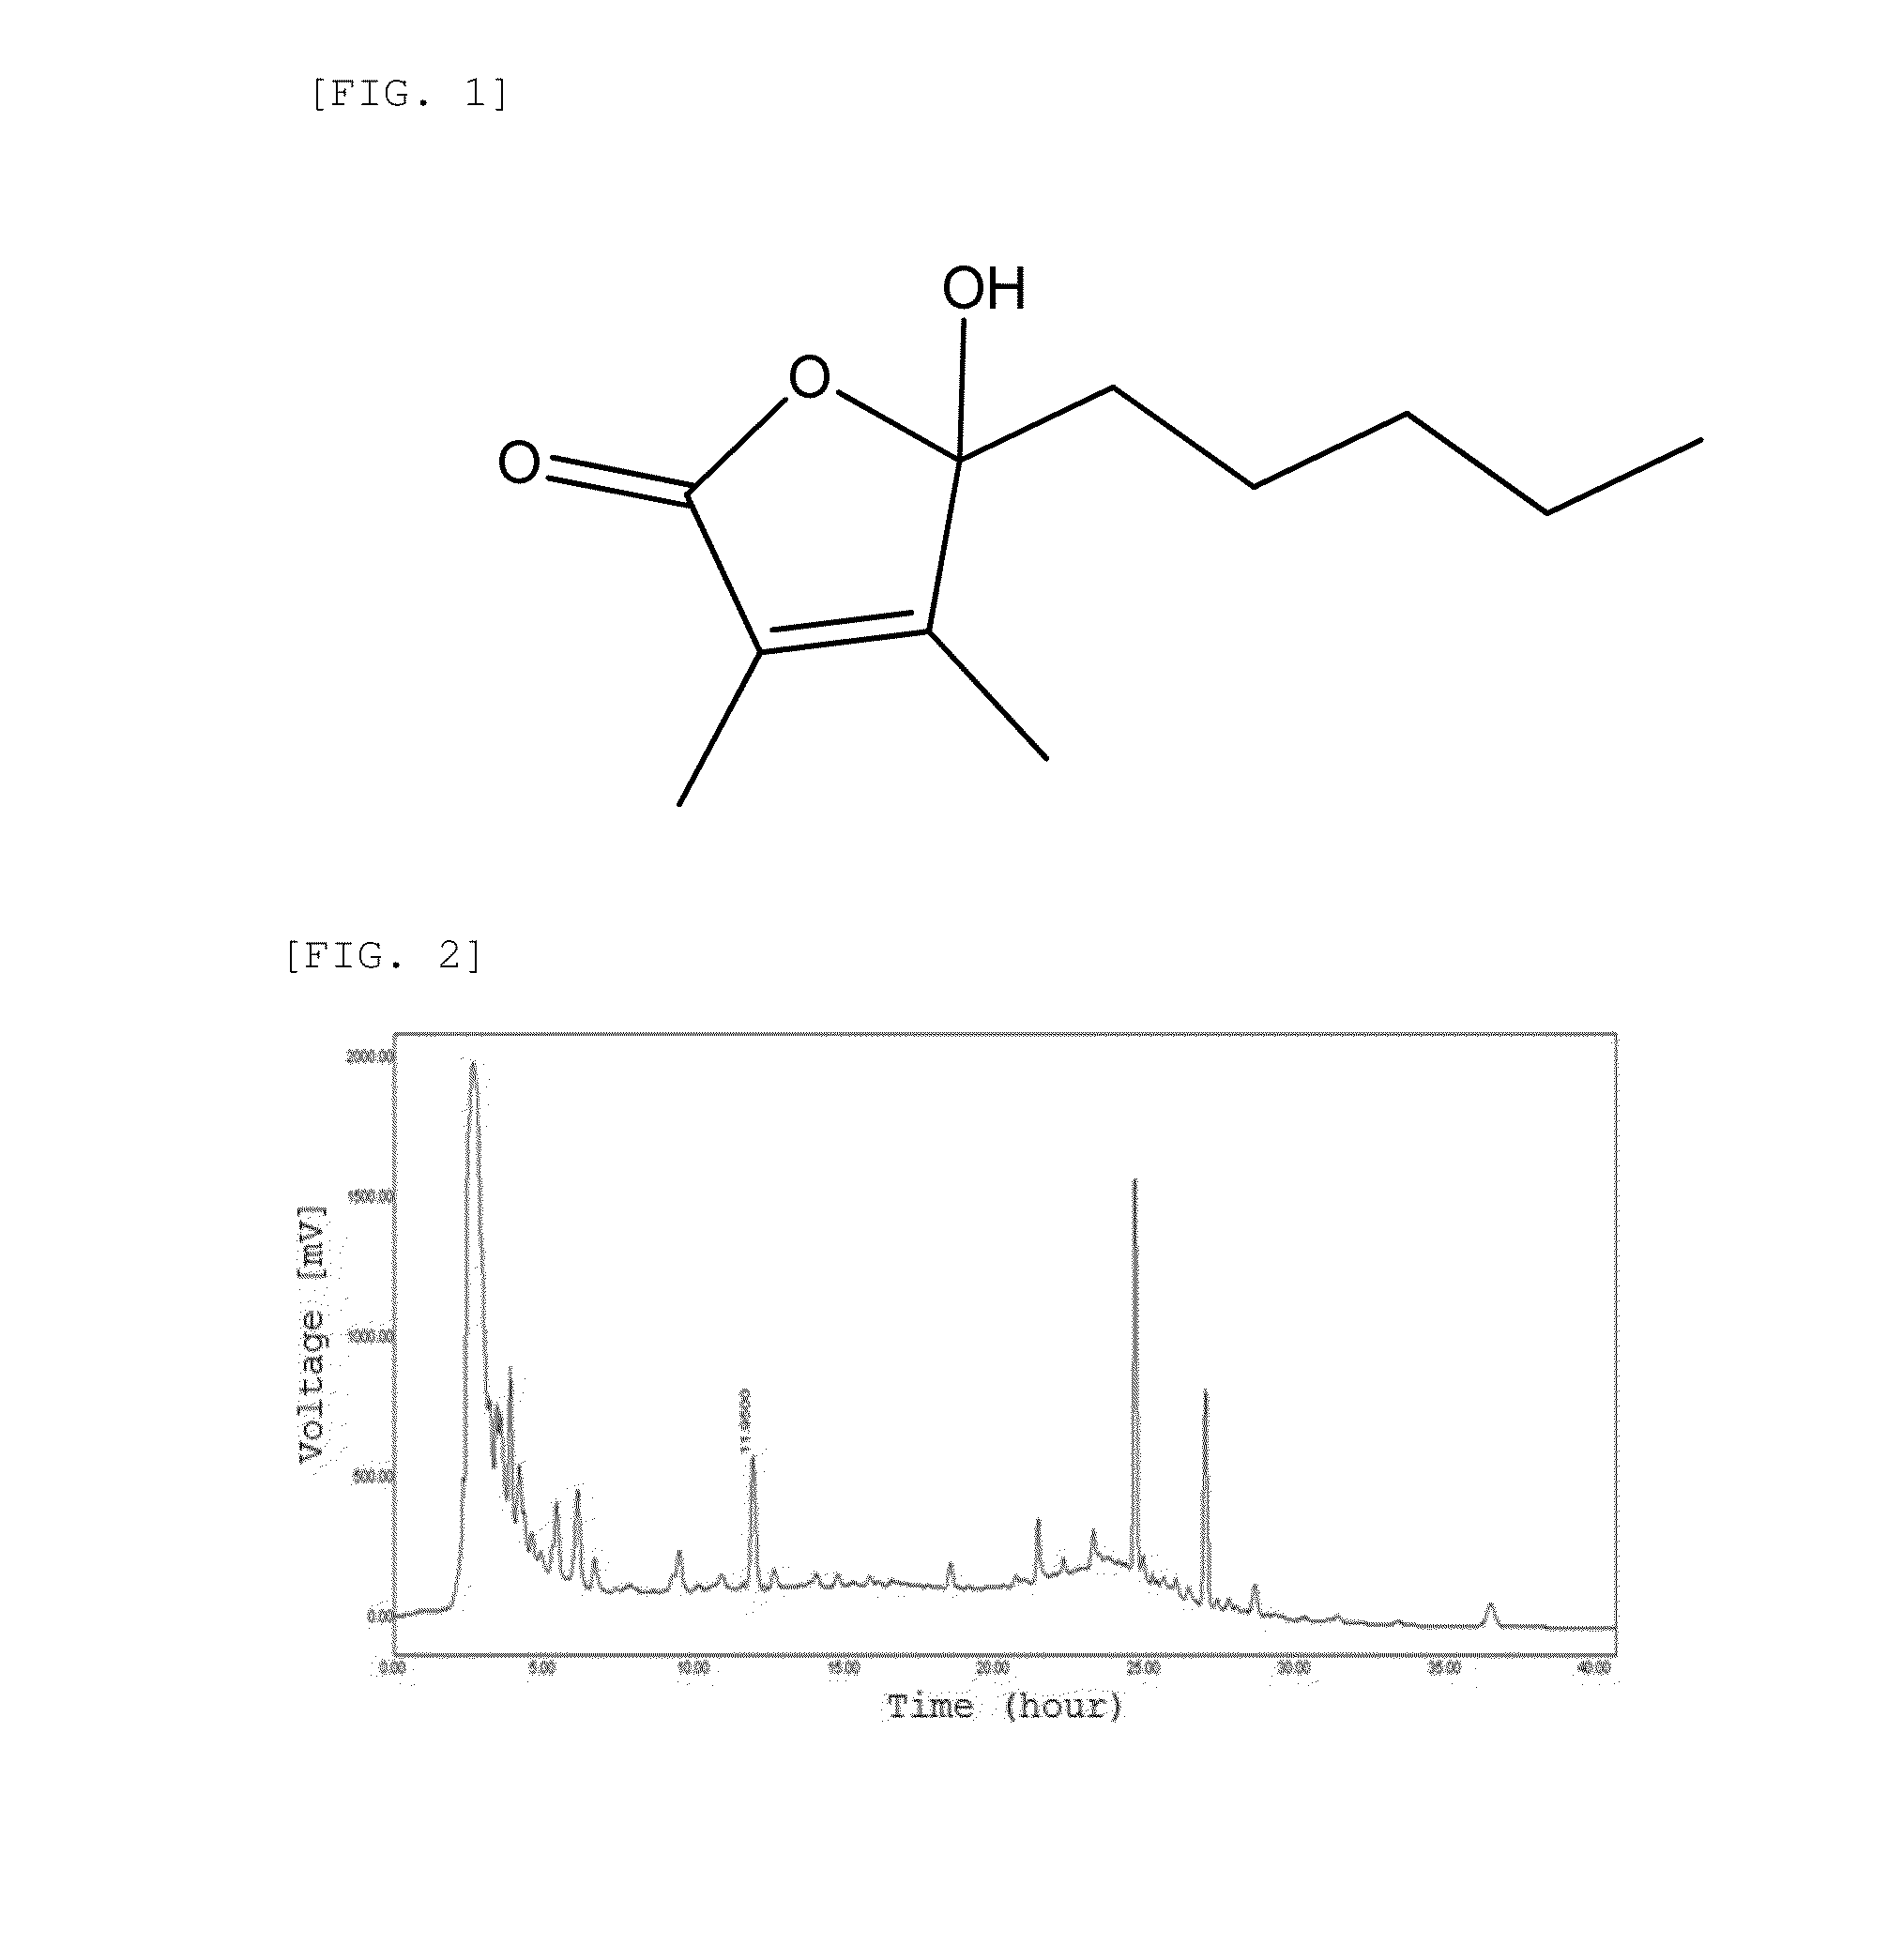 Composition for preventing hair loss and growing hair comprising hydroxydihydrobovolide